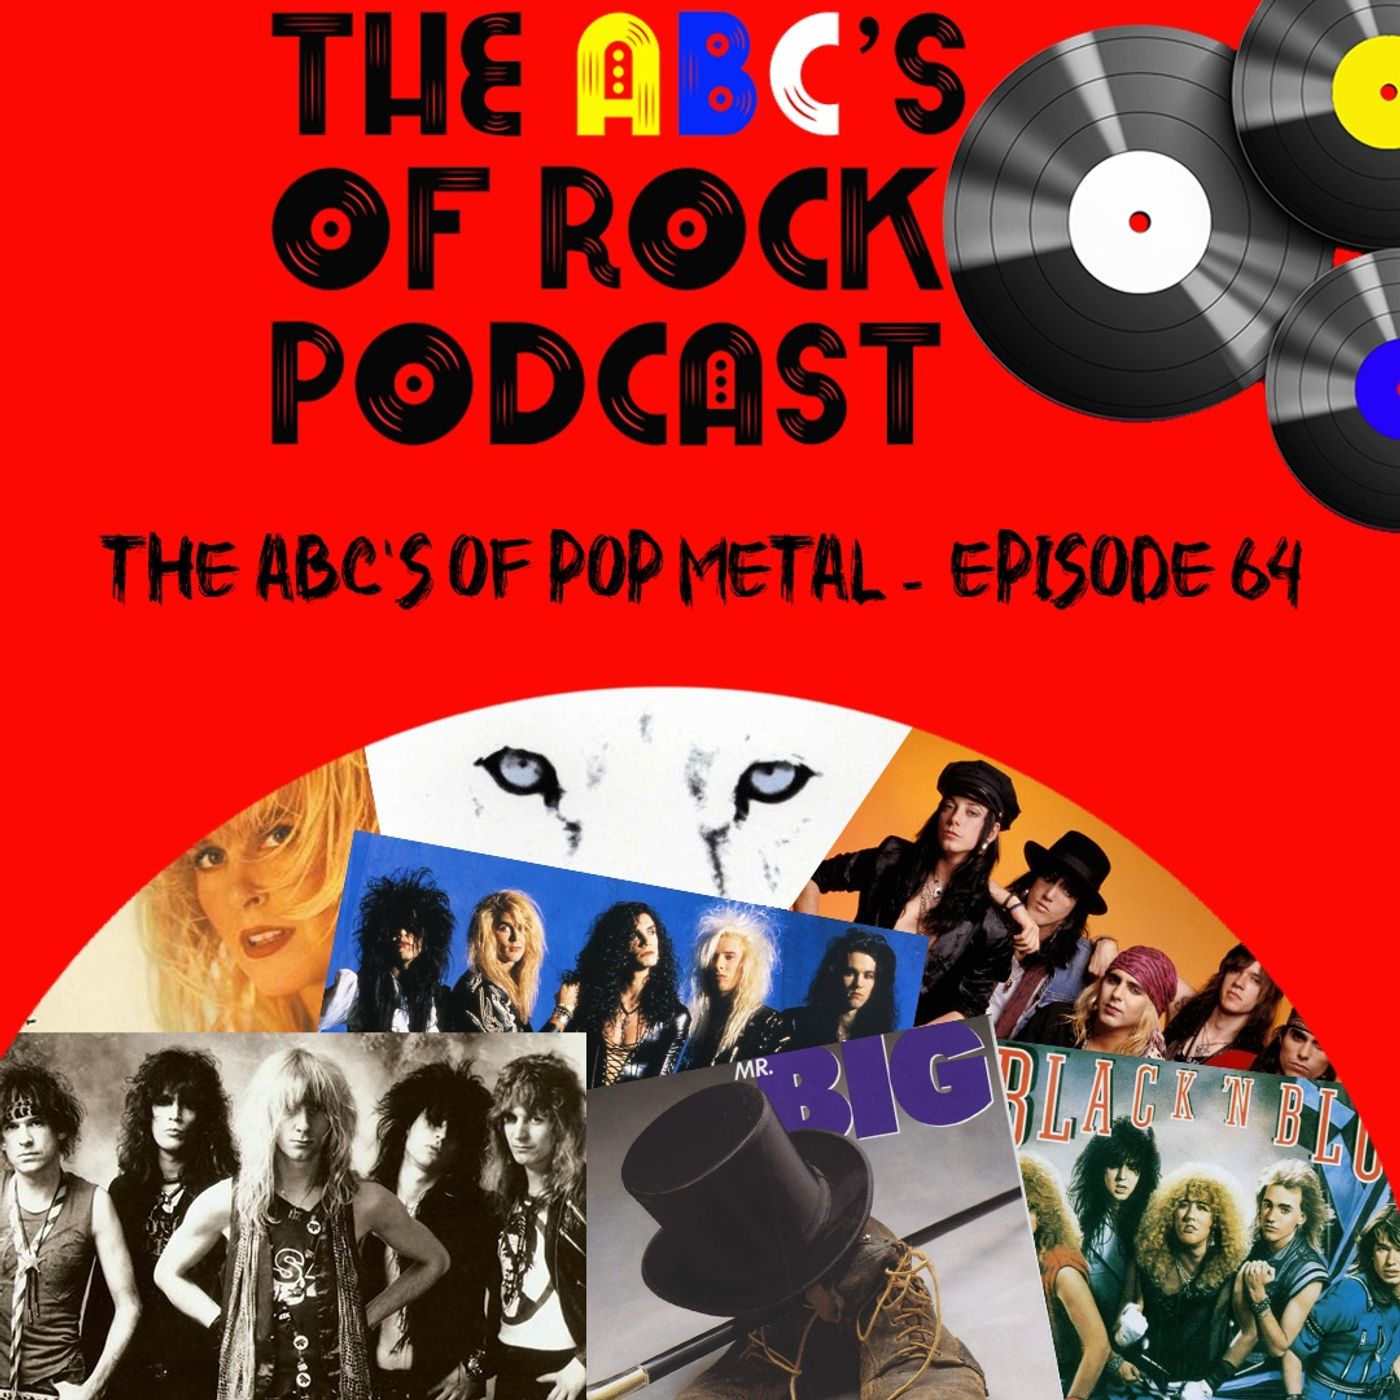 The ABC's of Pop Metal - Episode 64